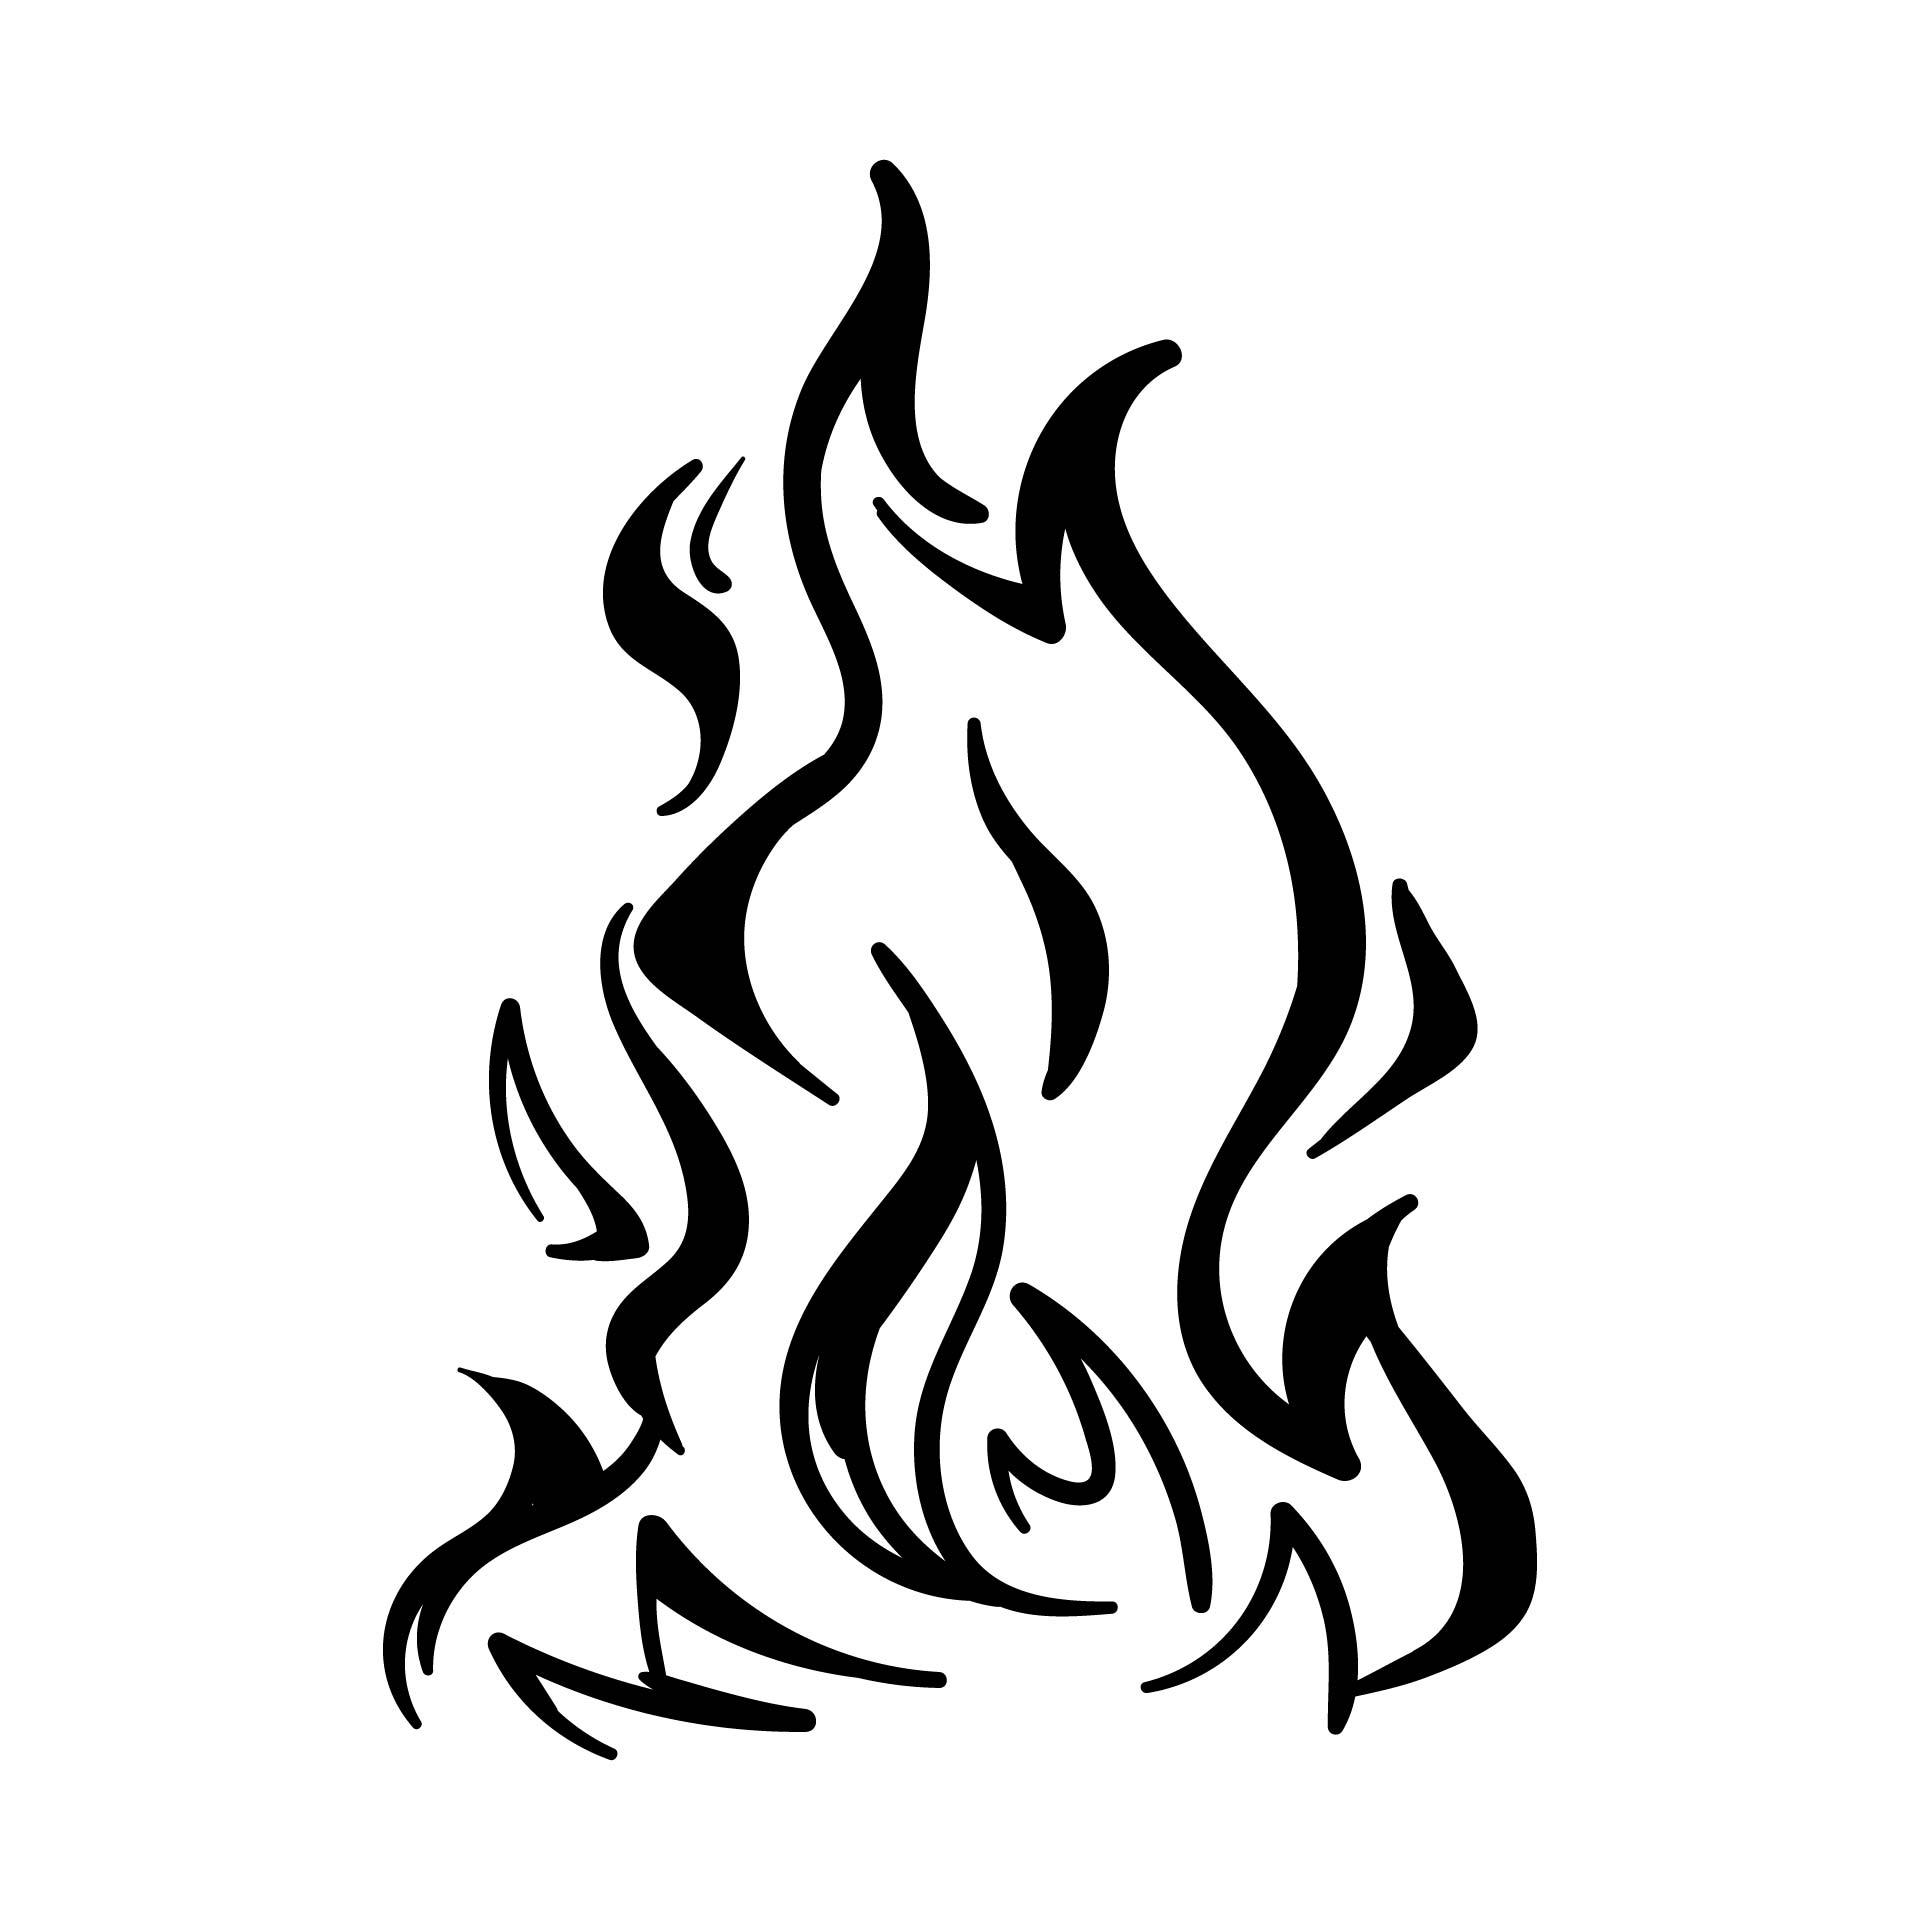 Free Printable Flame Template Printable Fire Flames Free Cliparts That You Can Download To